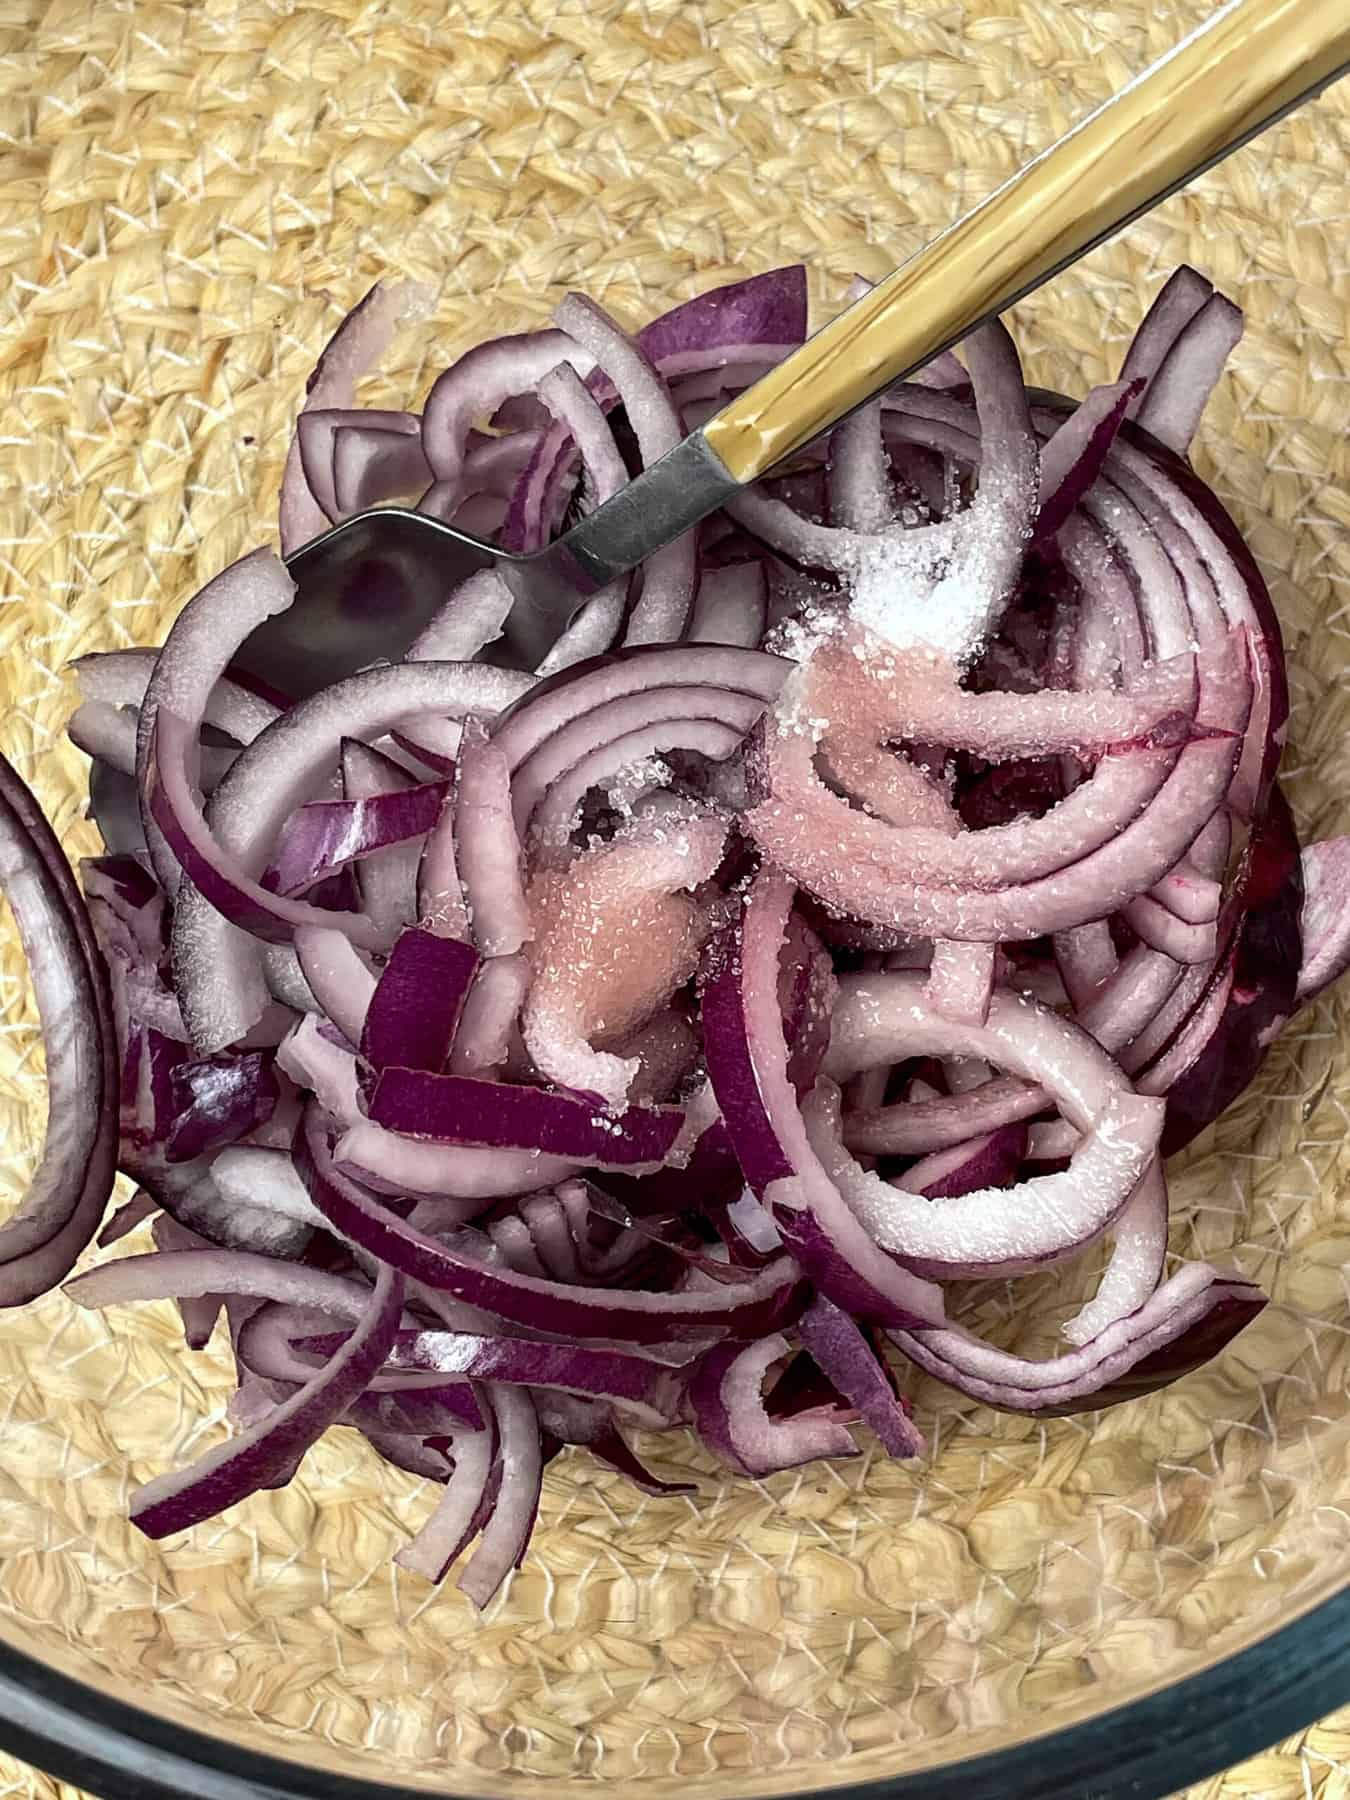 Red onion slices in glass bowl pickling in sugar and vinegar with spoon mixing.